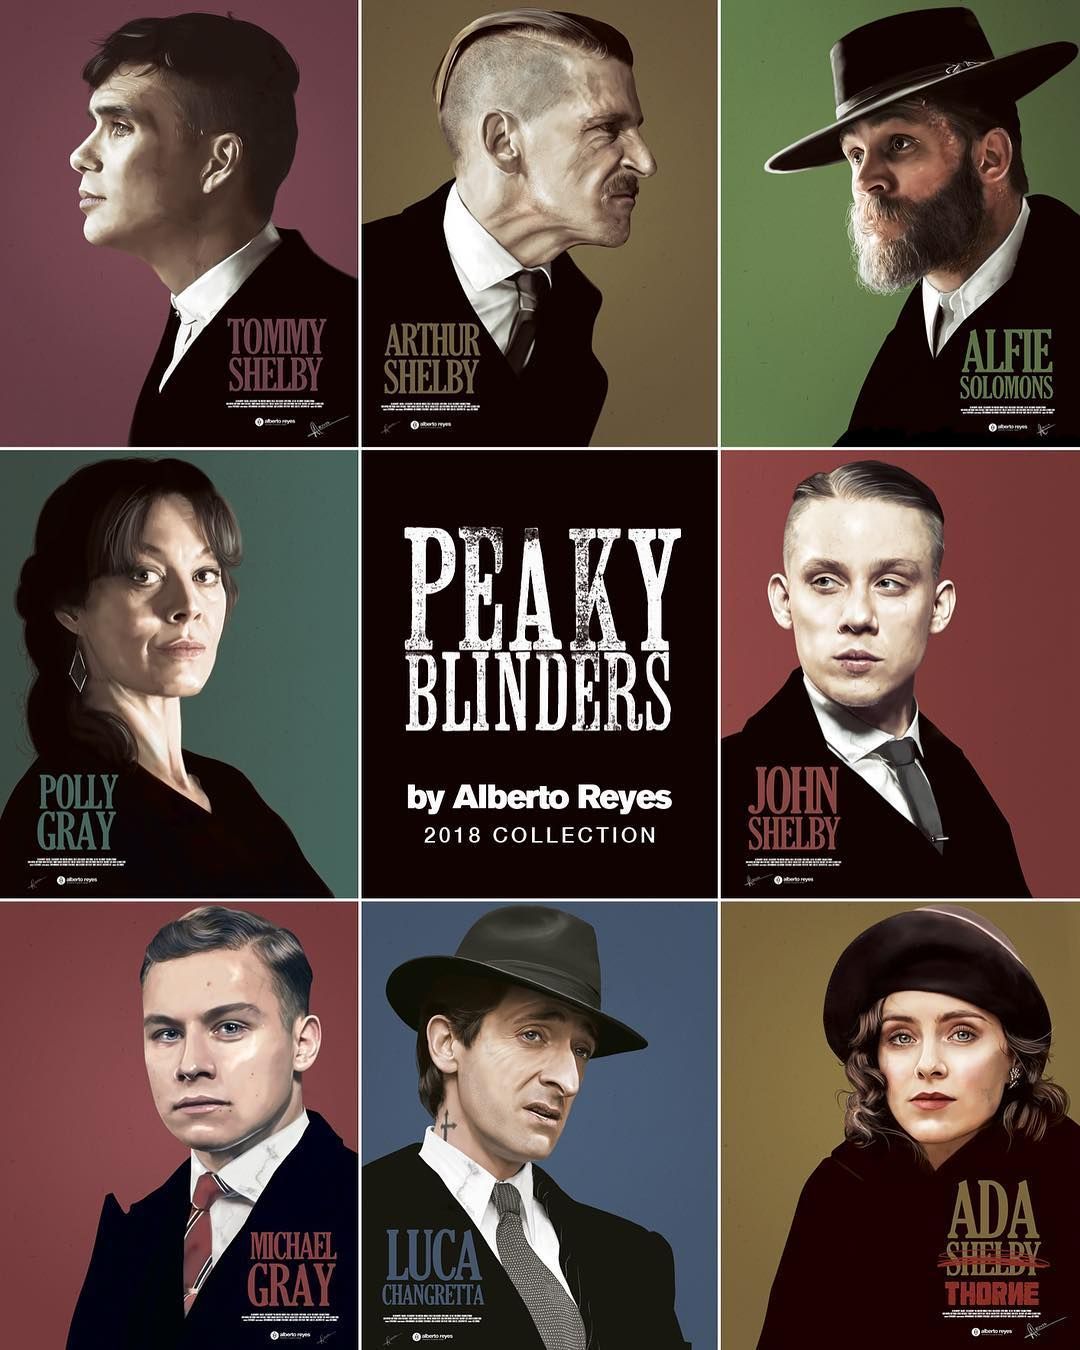 PEAKY BLINDERS POSTERS. Michael Gray and Ada Shelby are the latest additions to my PEA. Peaky blinders characters, Peaky blinders wallpaper, Peaky blinders poster